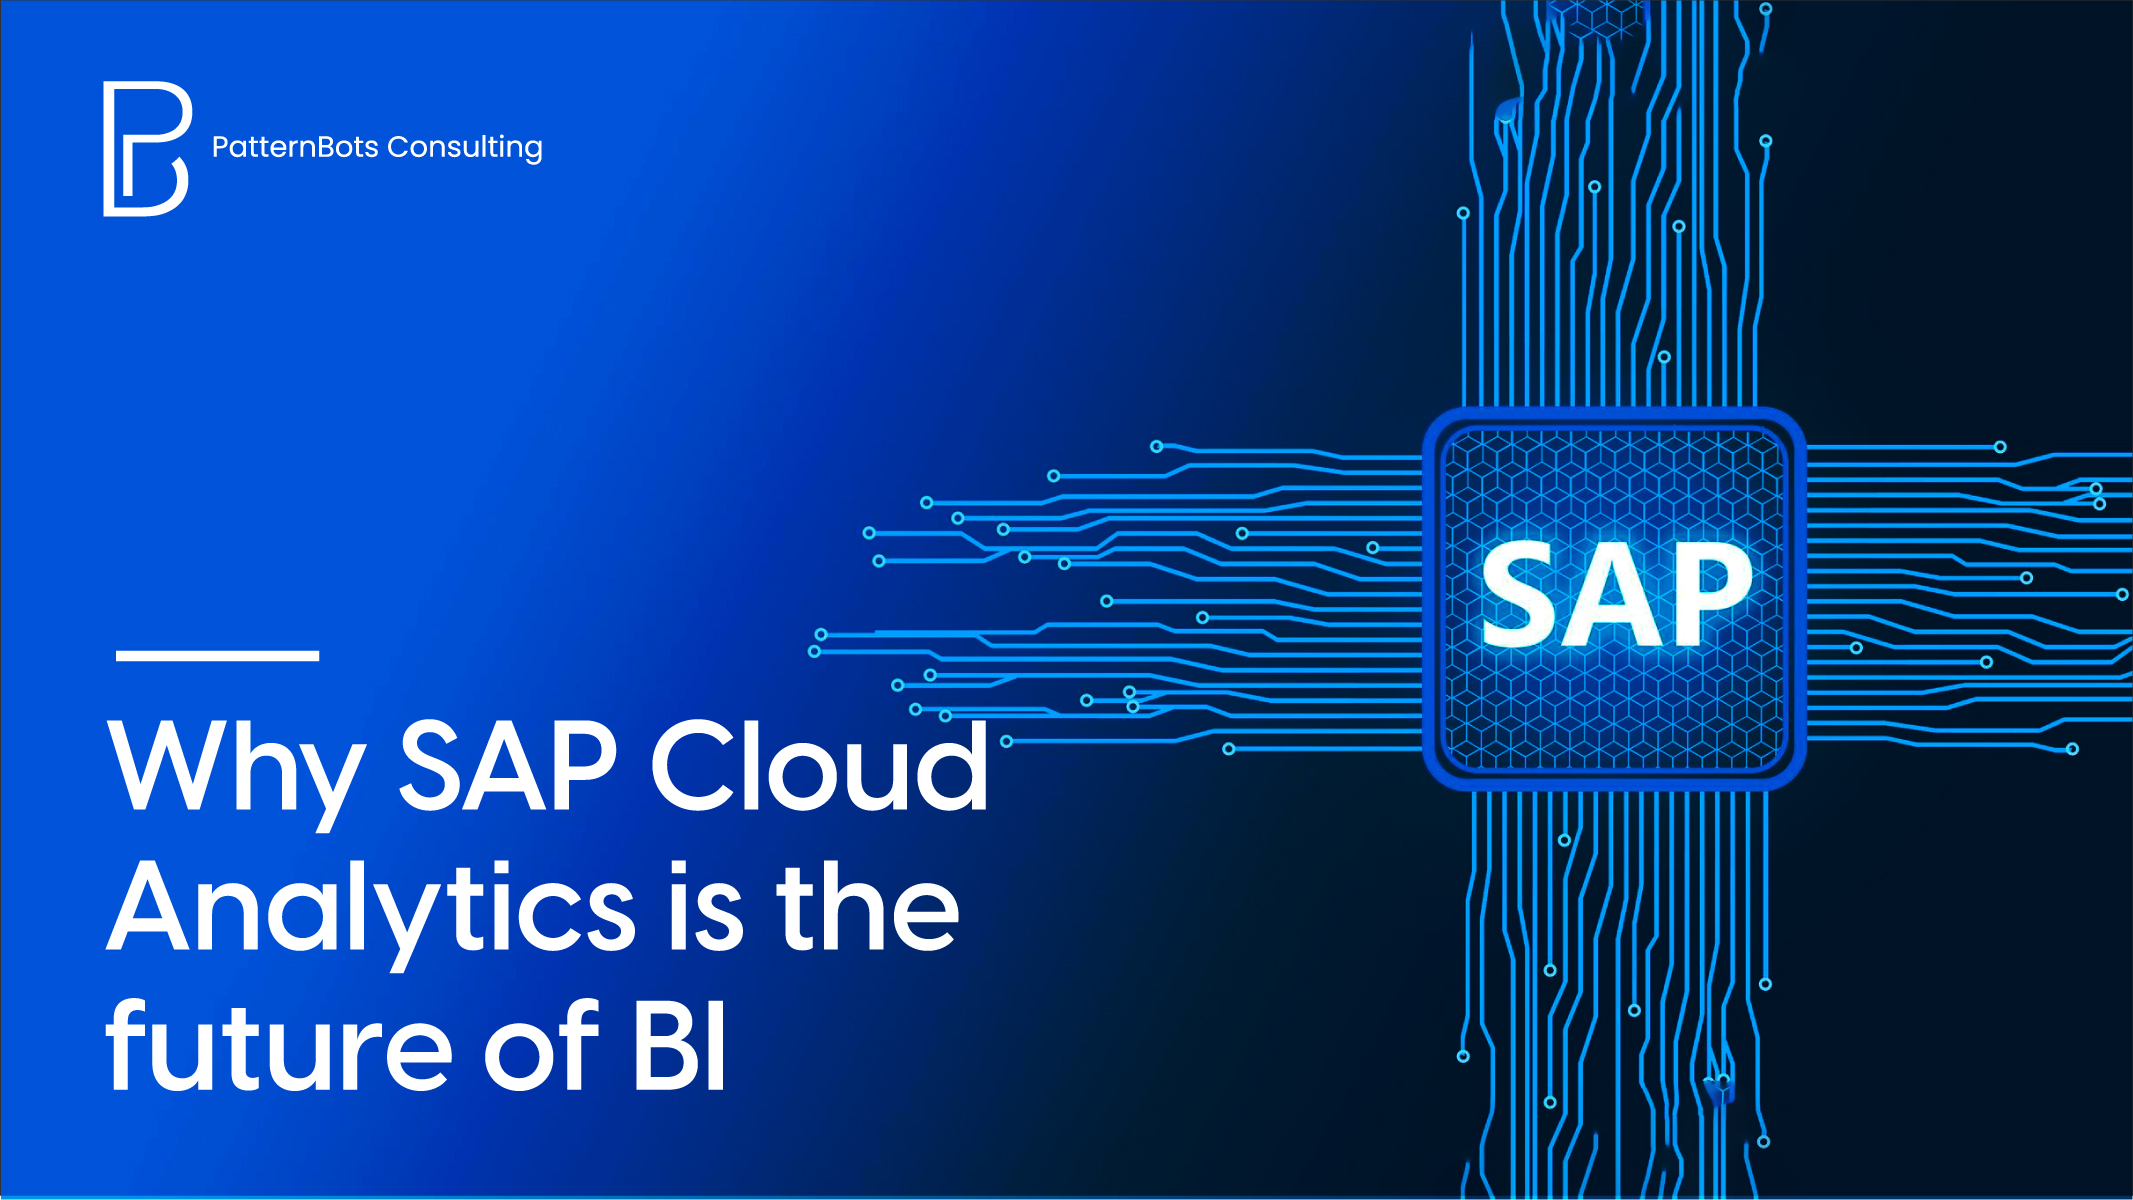 Why SAP Cloud Analytics is the future of BI - PatternBots